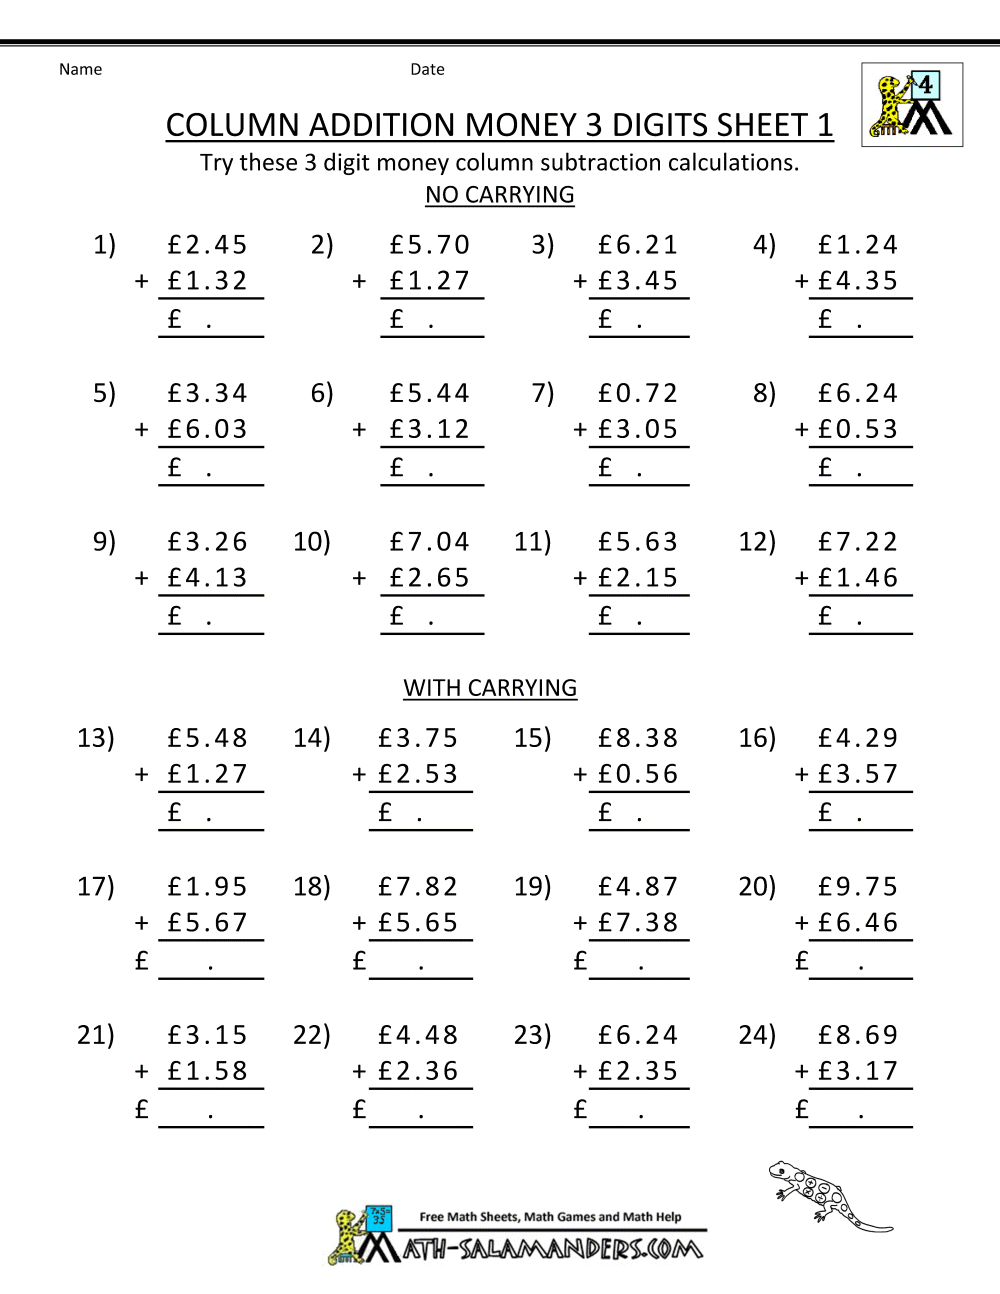 Column Addition Worksheets For Year The Best Worksheets Image